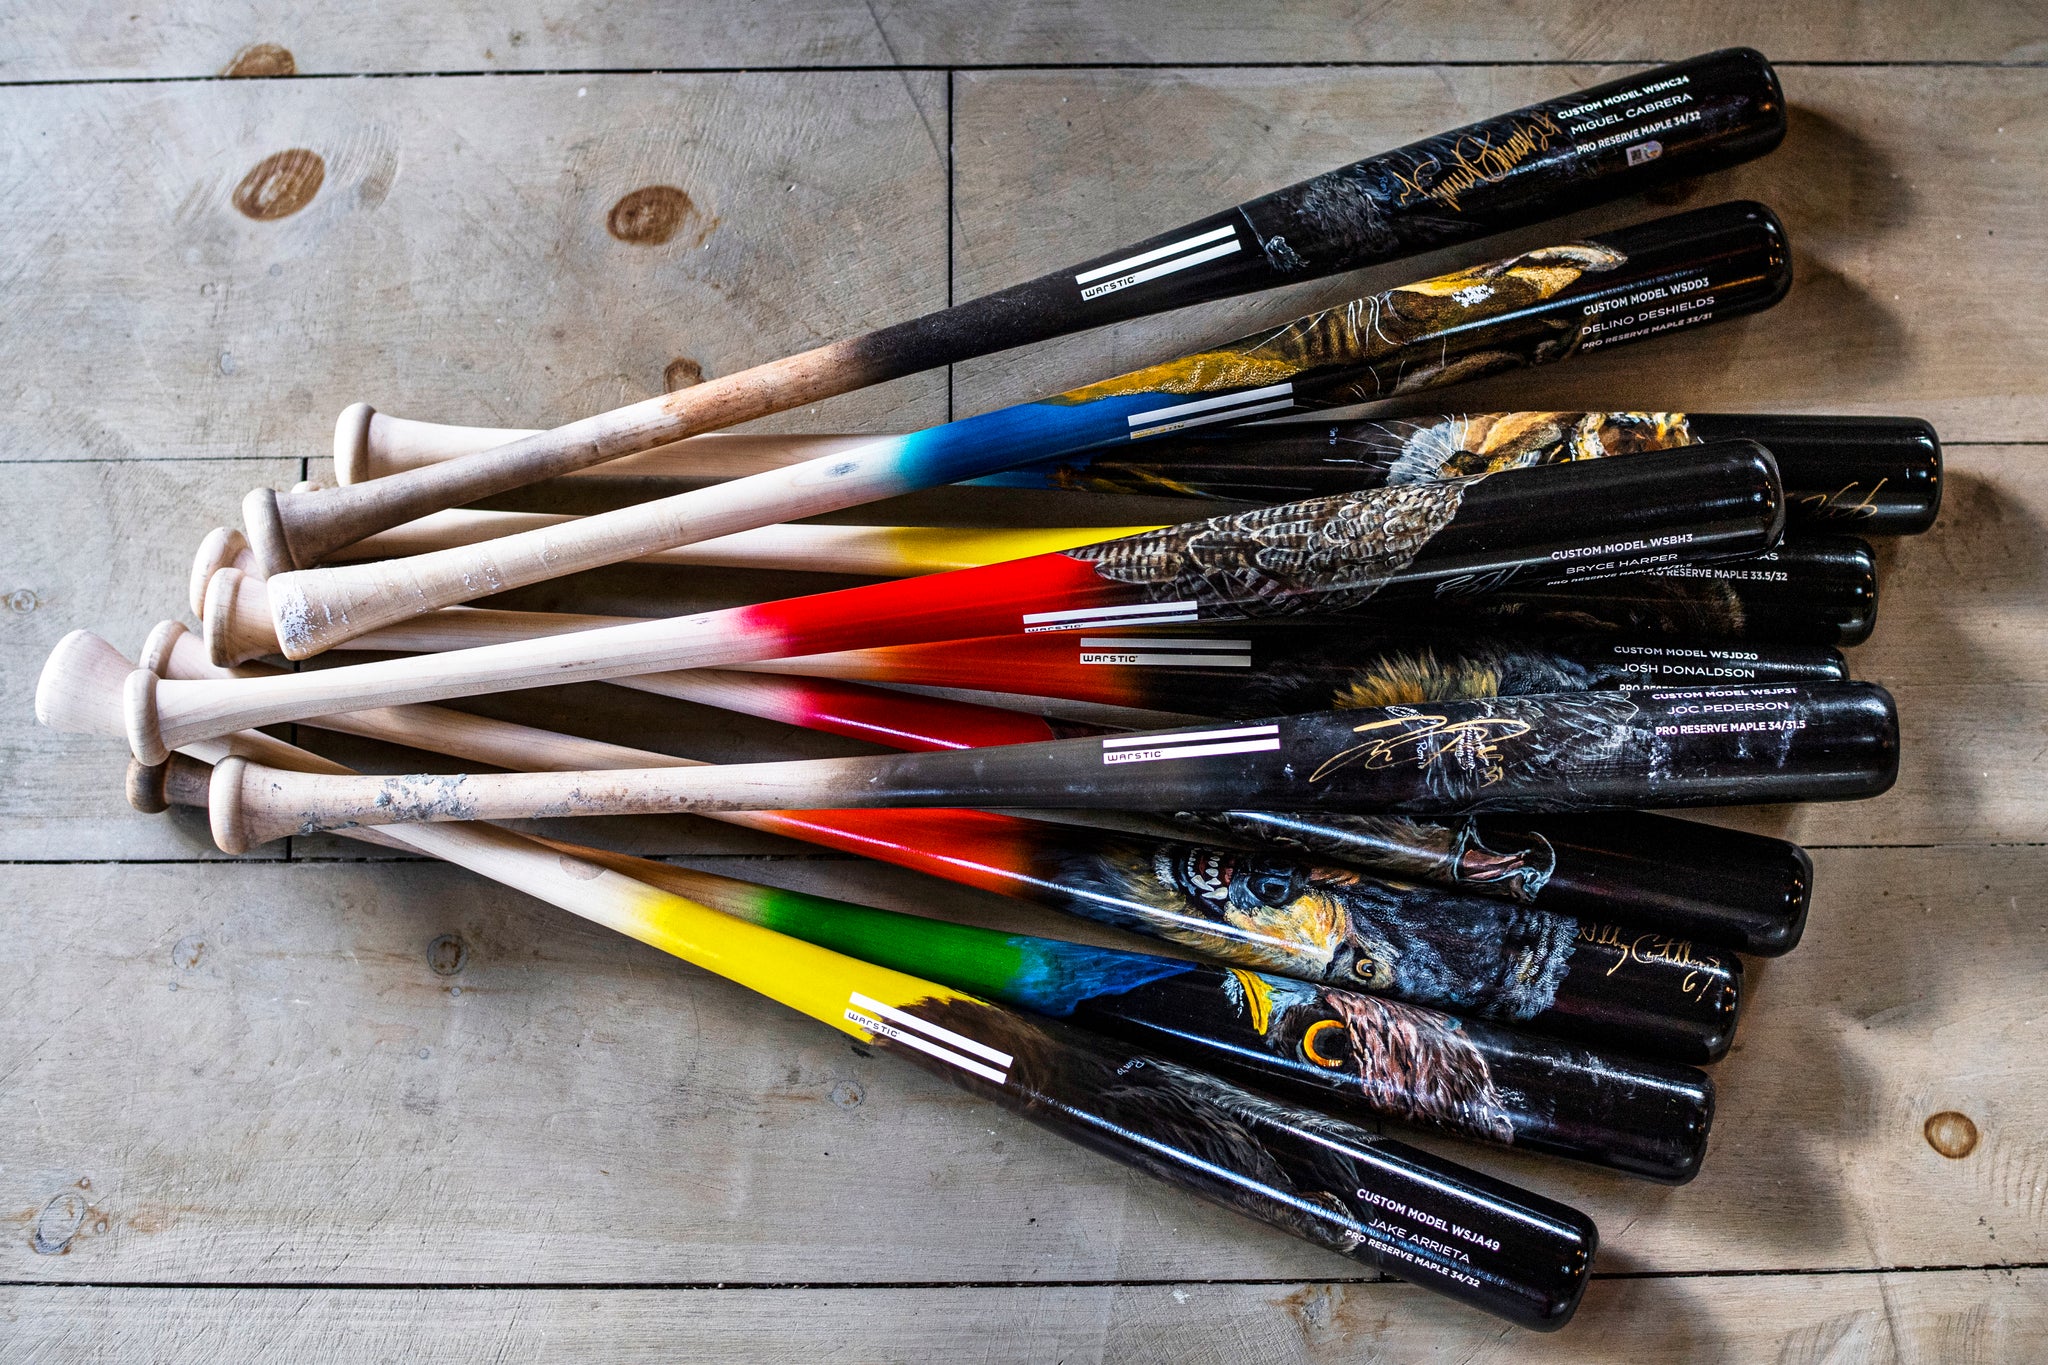 All of the Player's Weekend Bats in pile